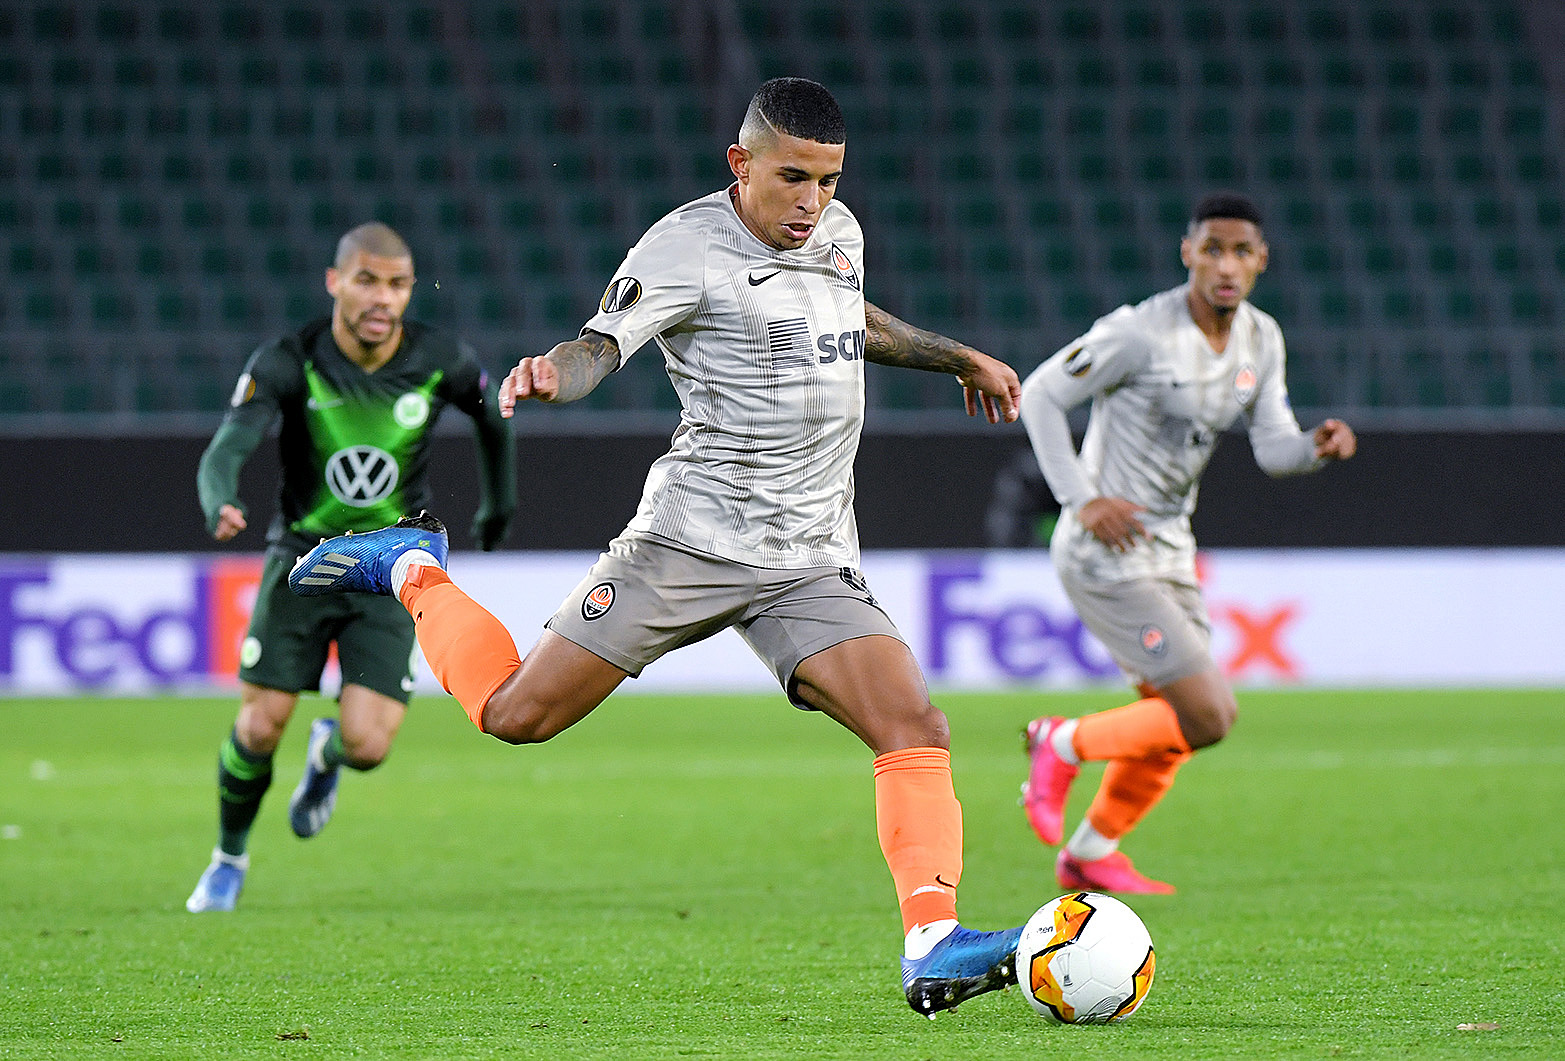 WOLFSBURG, GERMANY - MARCH 12: (FREE FOR EDITORIAL USE) In this handout image provided by VfL Wolfsburg, Dodo of Shakhtar Donetsk runs with the ball during the UEFA Europa League round of 16 first leg match between VfL Wolfsburg and Shakhtar Donetsk at Volkswagen Arena on March 12, 2020 in Wolfsburg, Germany. The match was played behind closed doors as a precaution against the spread of COVID-19 (Coronavirus). (Photo by Handout/VfL Wolfsburg via Getty Images)